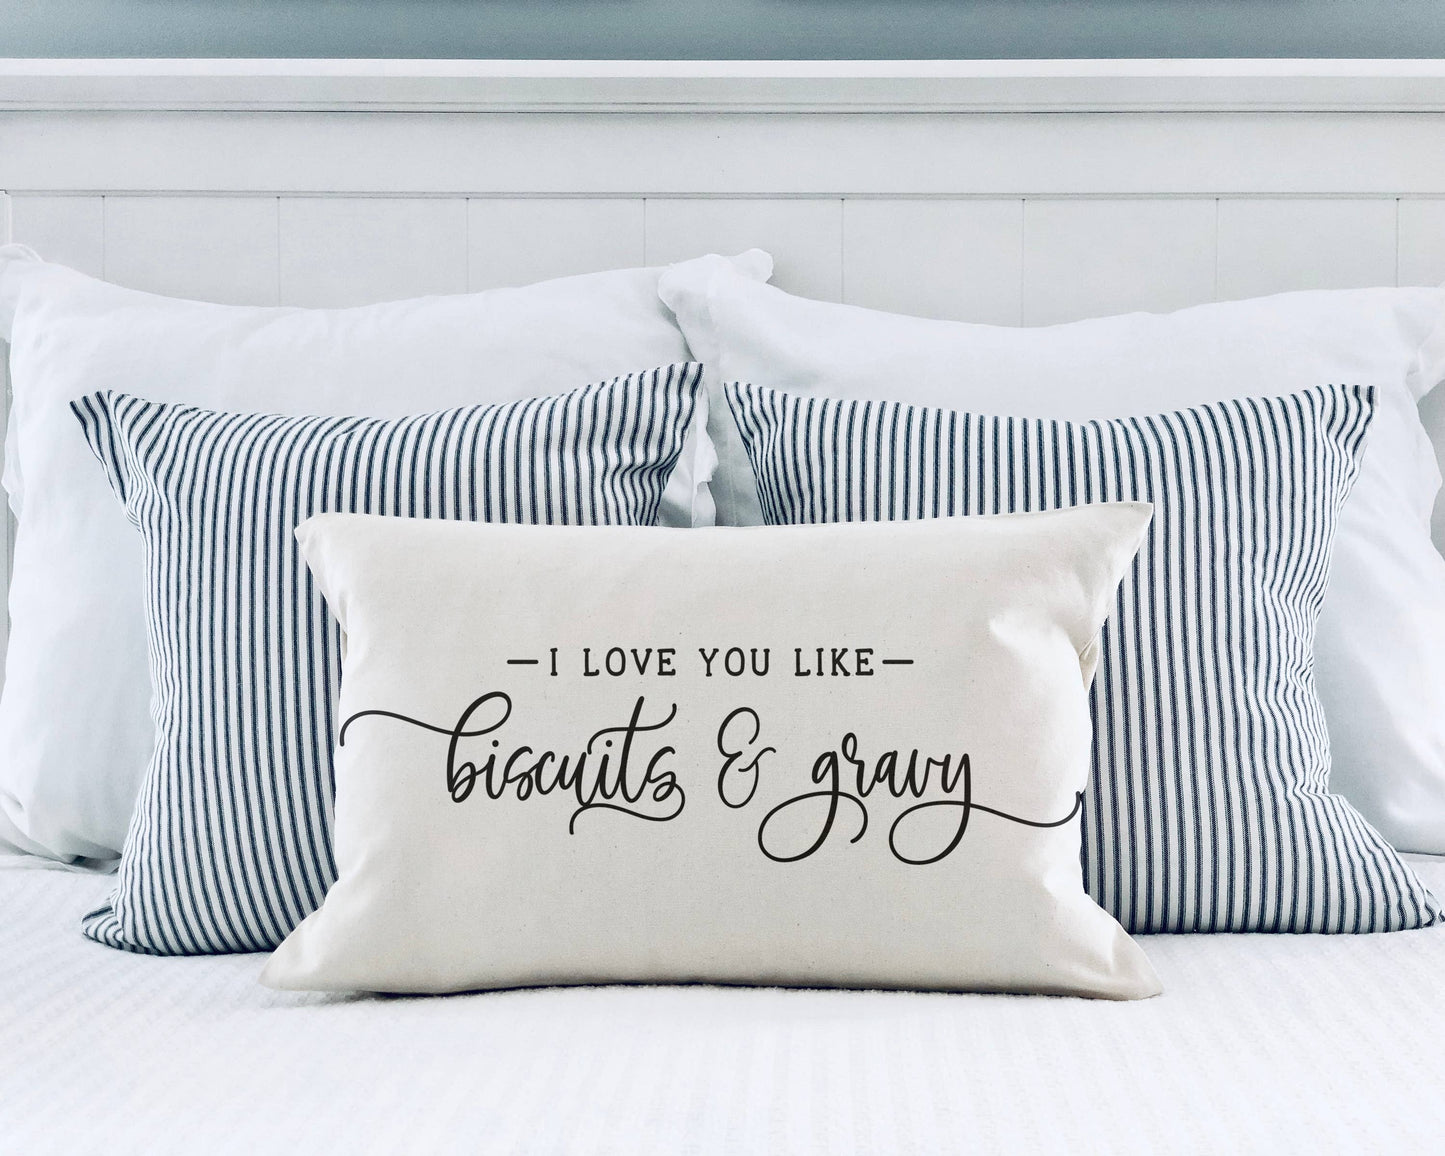 "I Love You Like Biscuits And Gravy" Pillow Cover